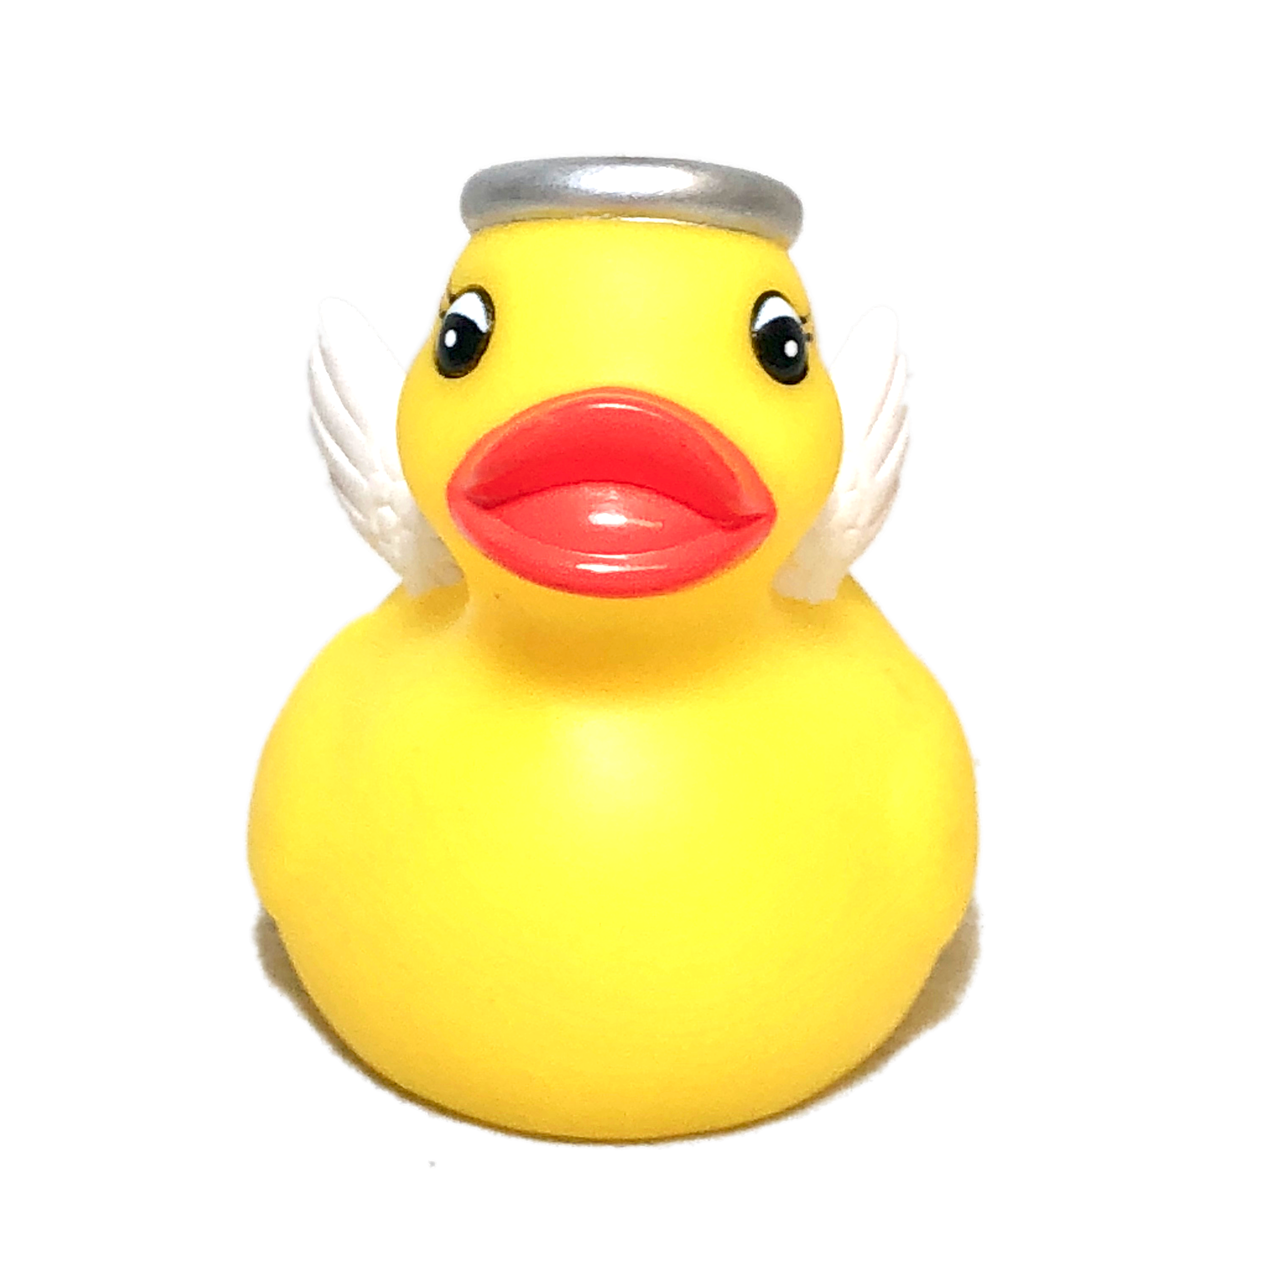 Ducks clipart yellow color. Classic angel rubber duck